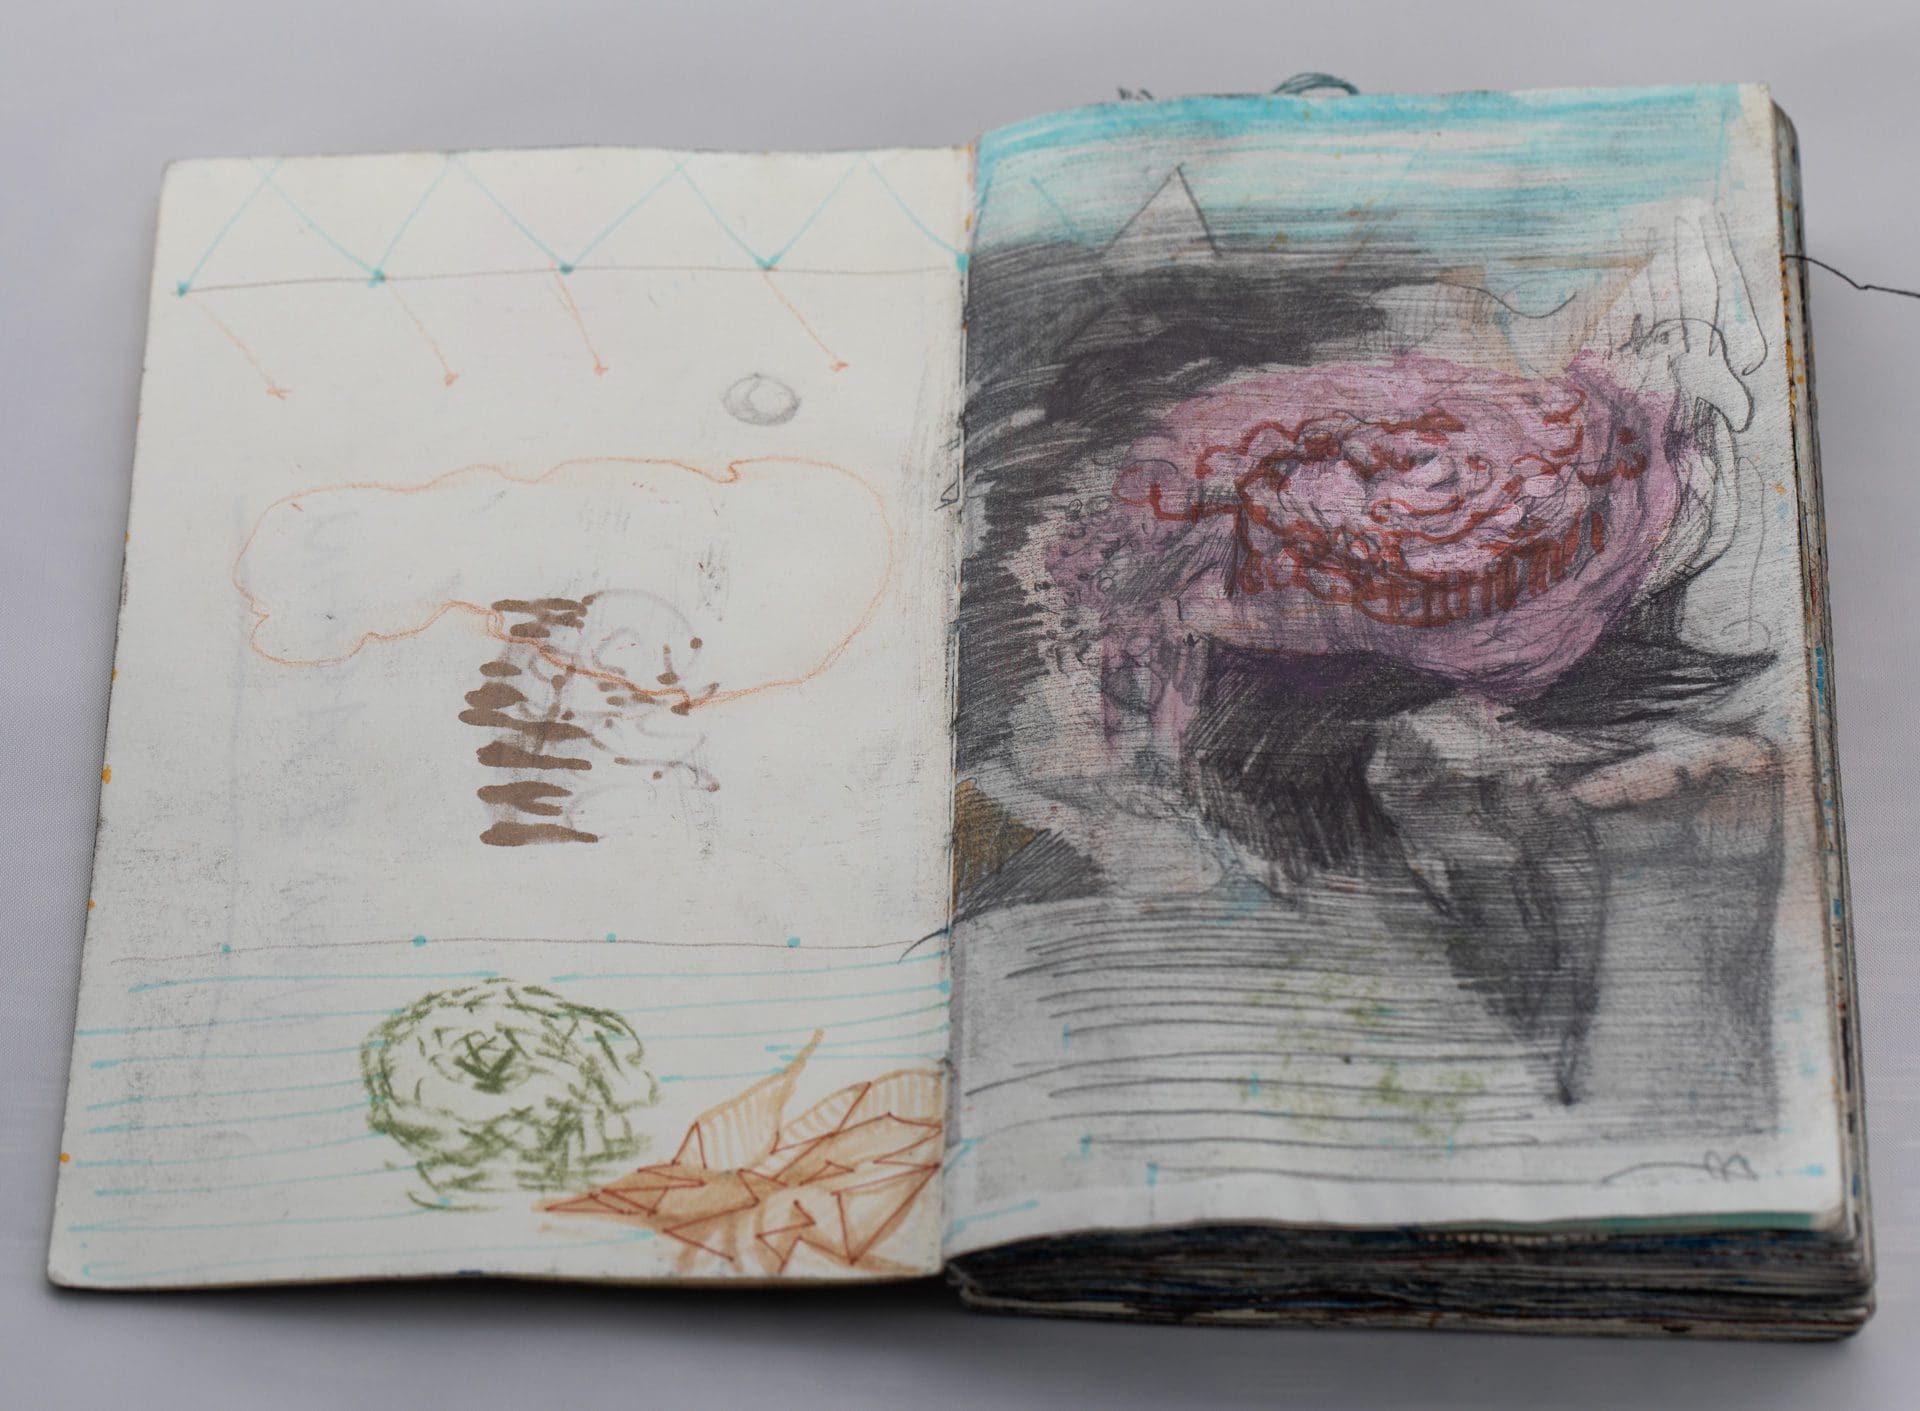 Dust & Rose - Buddhist Sketchbook pages 4 & 5